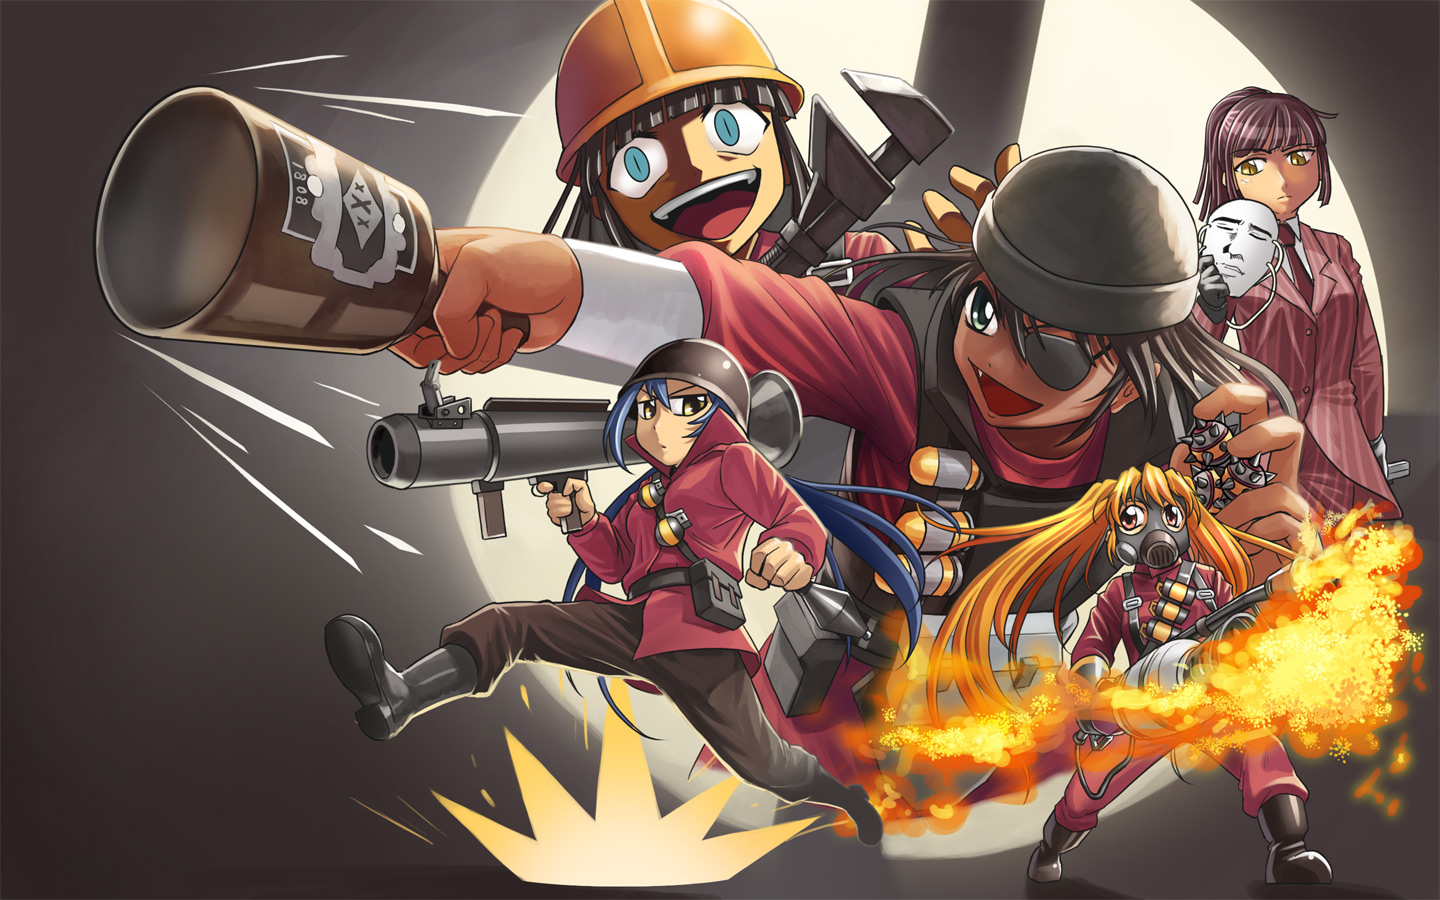 View Fullsize Team Fortress 2 Image - Team Fortress 2 Anime Girls , HD Wallpaper & Backgrounds